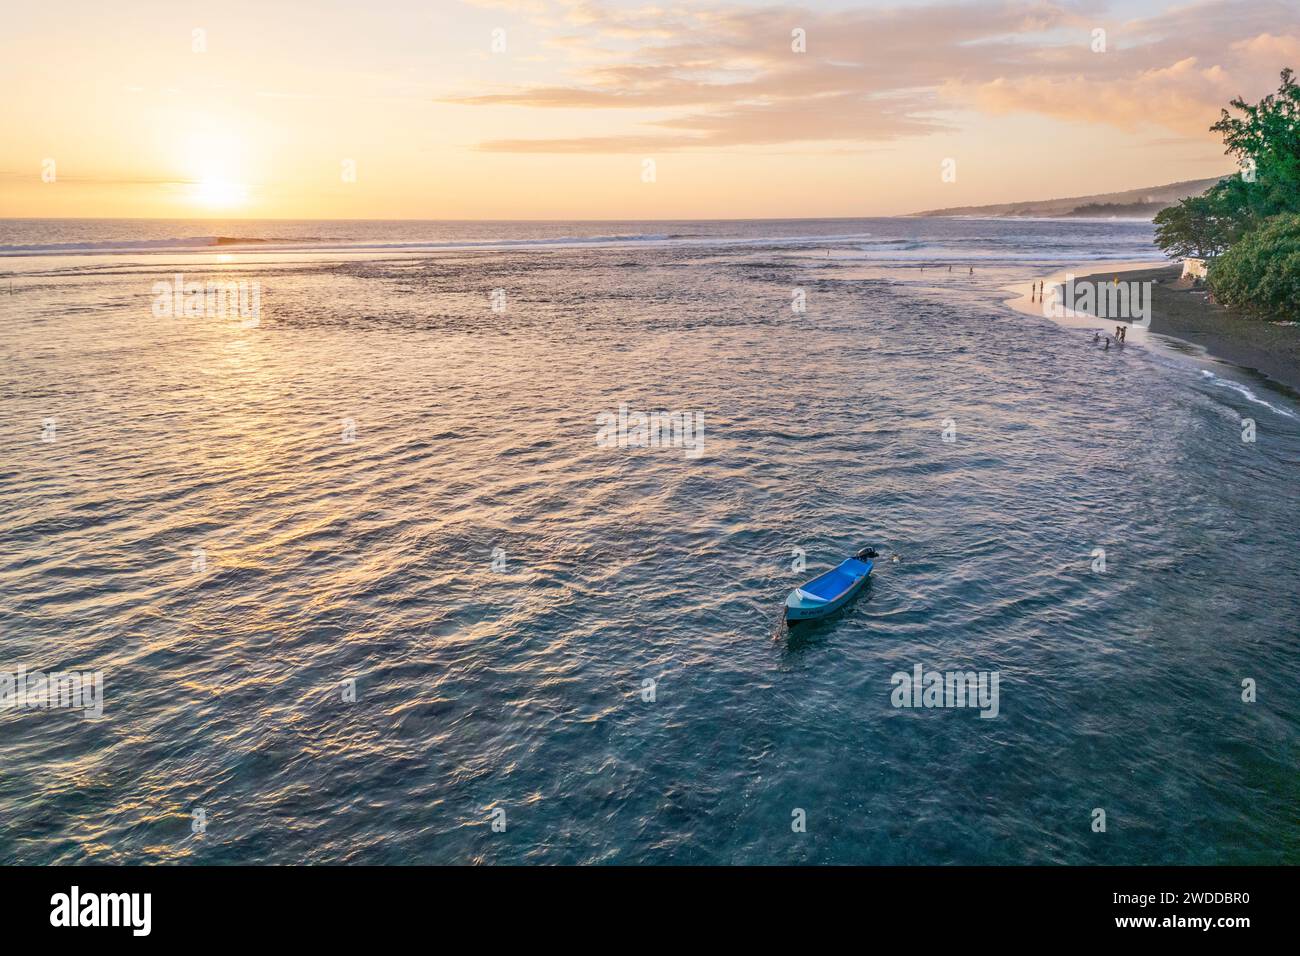 An elegant aerial view of a boat on a beach, during a magnificent sunset. Tourists swimming and enjoying the view. Étang-Salé, Reunion Island. Stock Photo